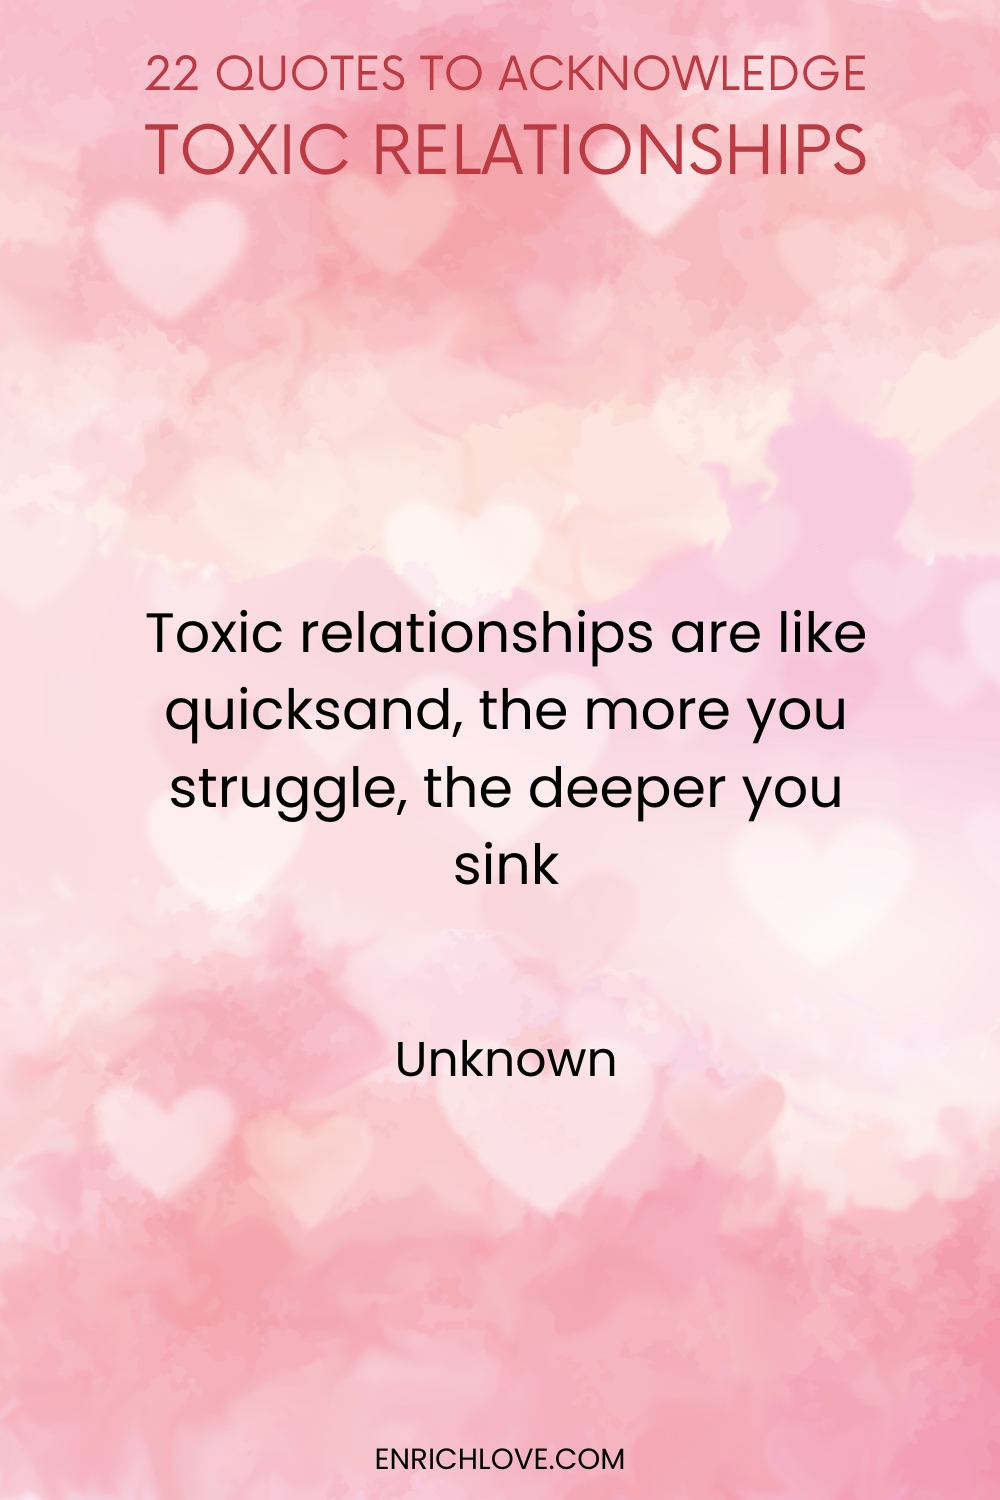 22 Quotes to Acknowledge Toxic Relationships -Toxic relationships are like quicksand, the more you struggle, the deeper you sink by Unknown